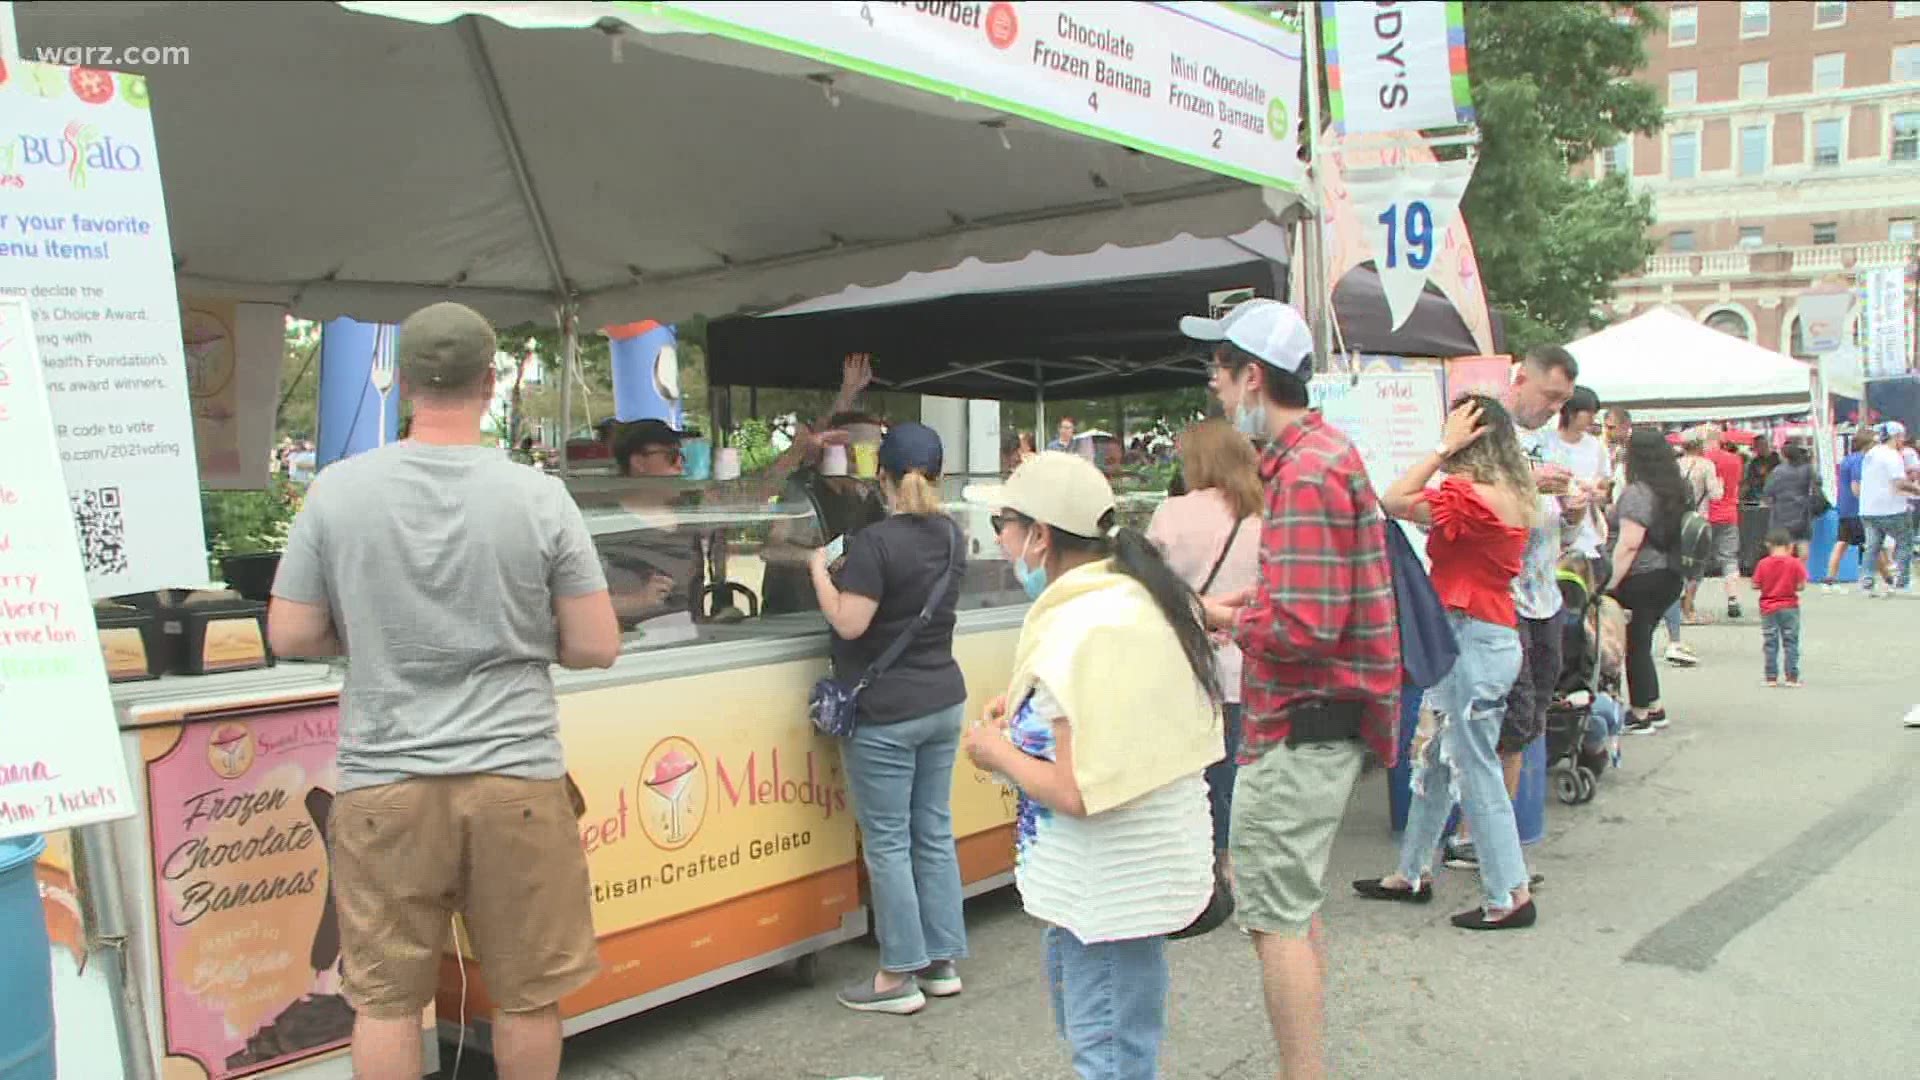 The Taste of Buffalo is back in full force and in full flavor this weekend.